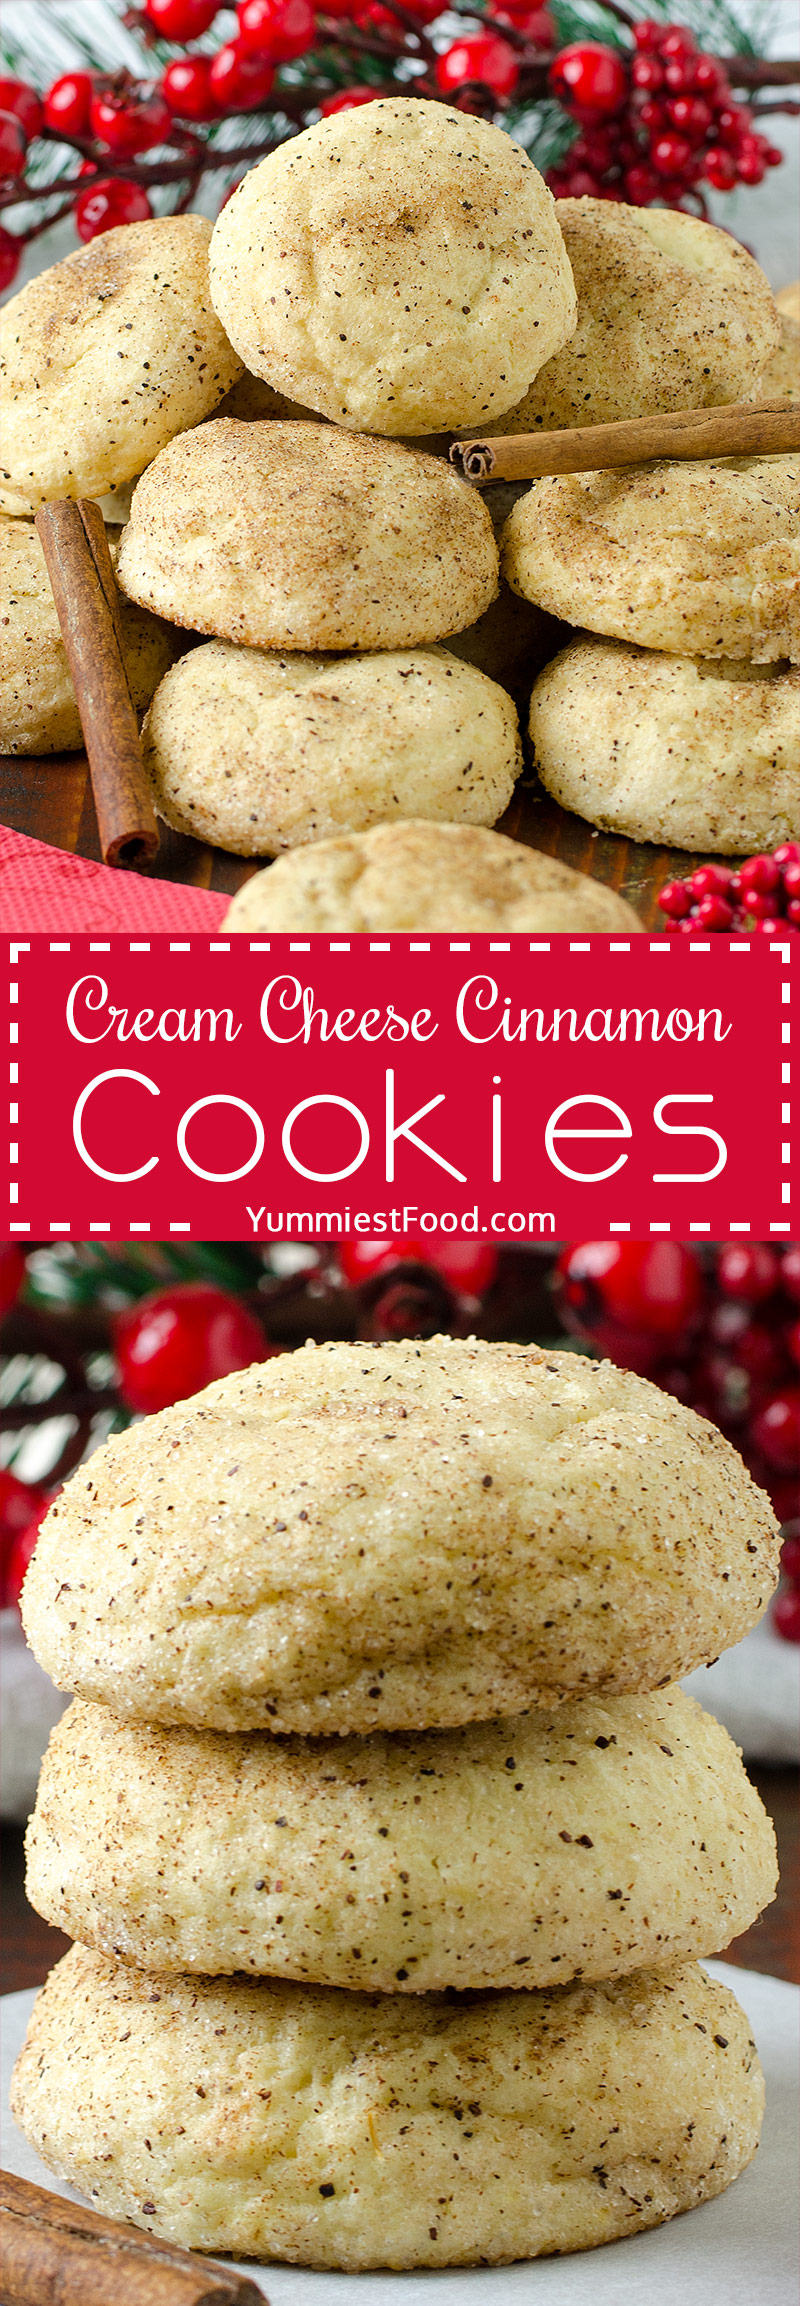 EASY CREAM CHEESE CINNAMON CHRISTMAS COOKIES - Easy and best cream cheese cinnamon cookies recipe ever! Perfect cookies for holidays